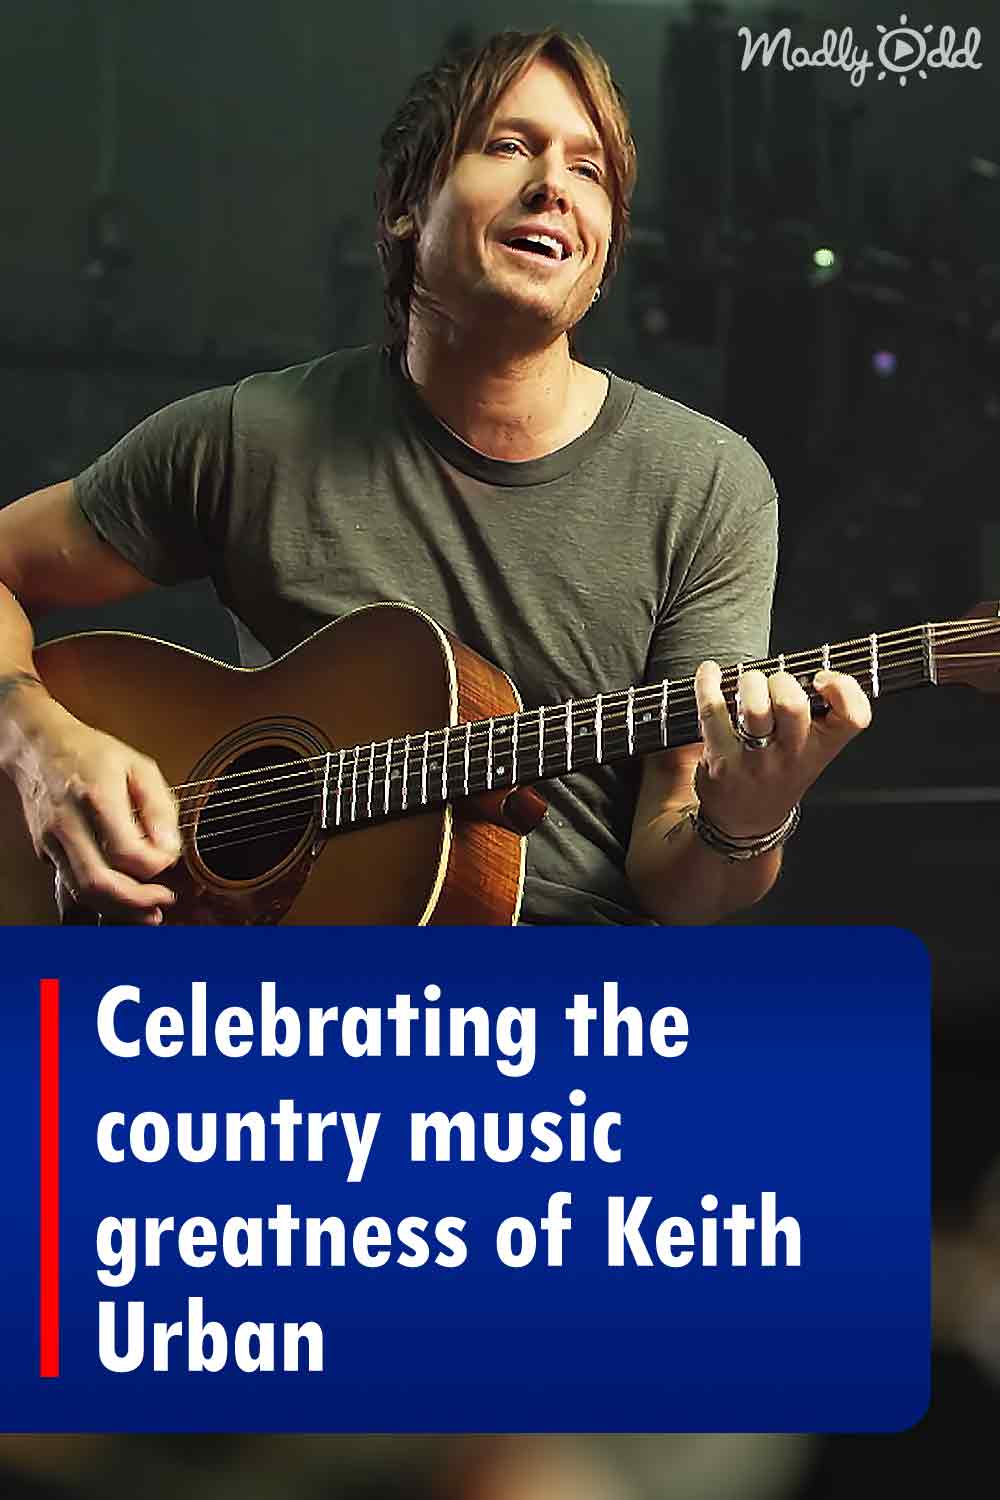 Celebrating the country music greatness of Keith Urban